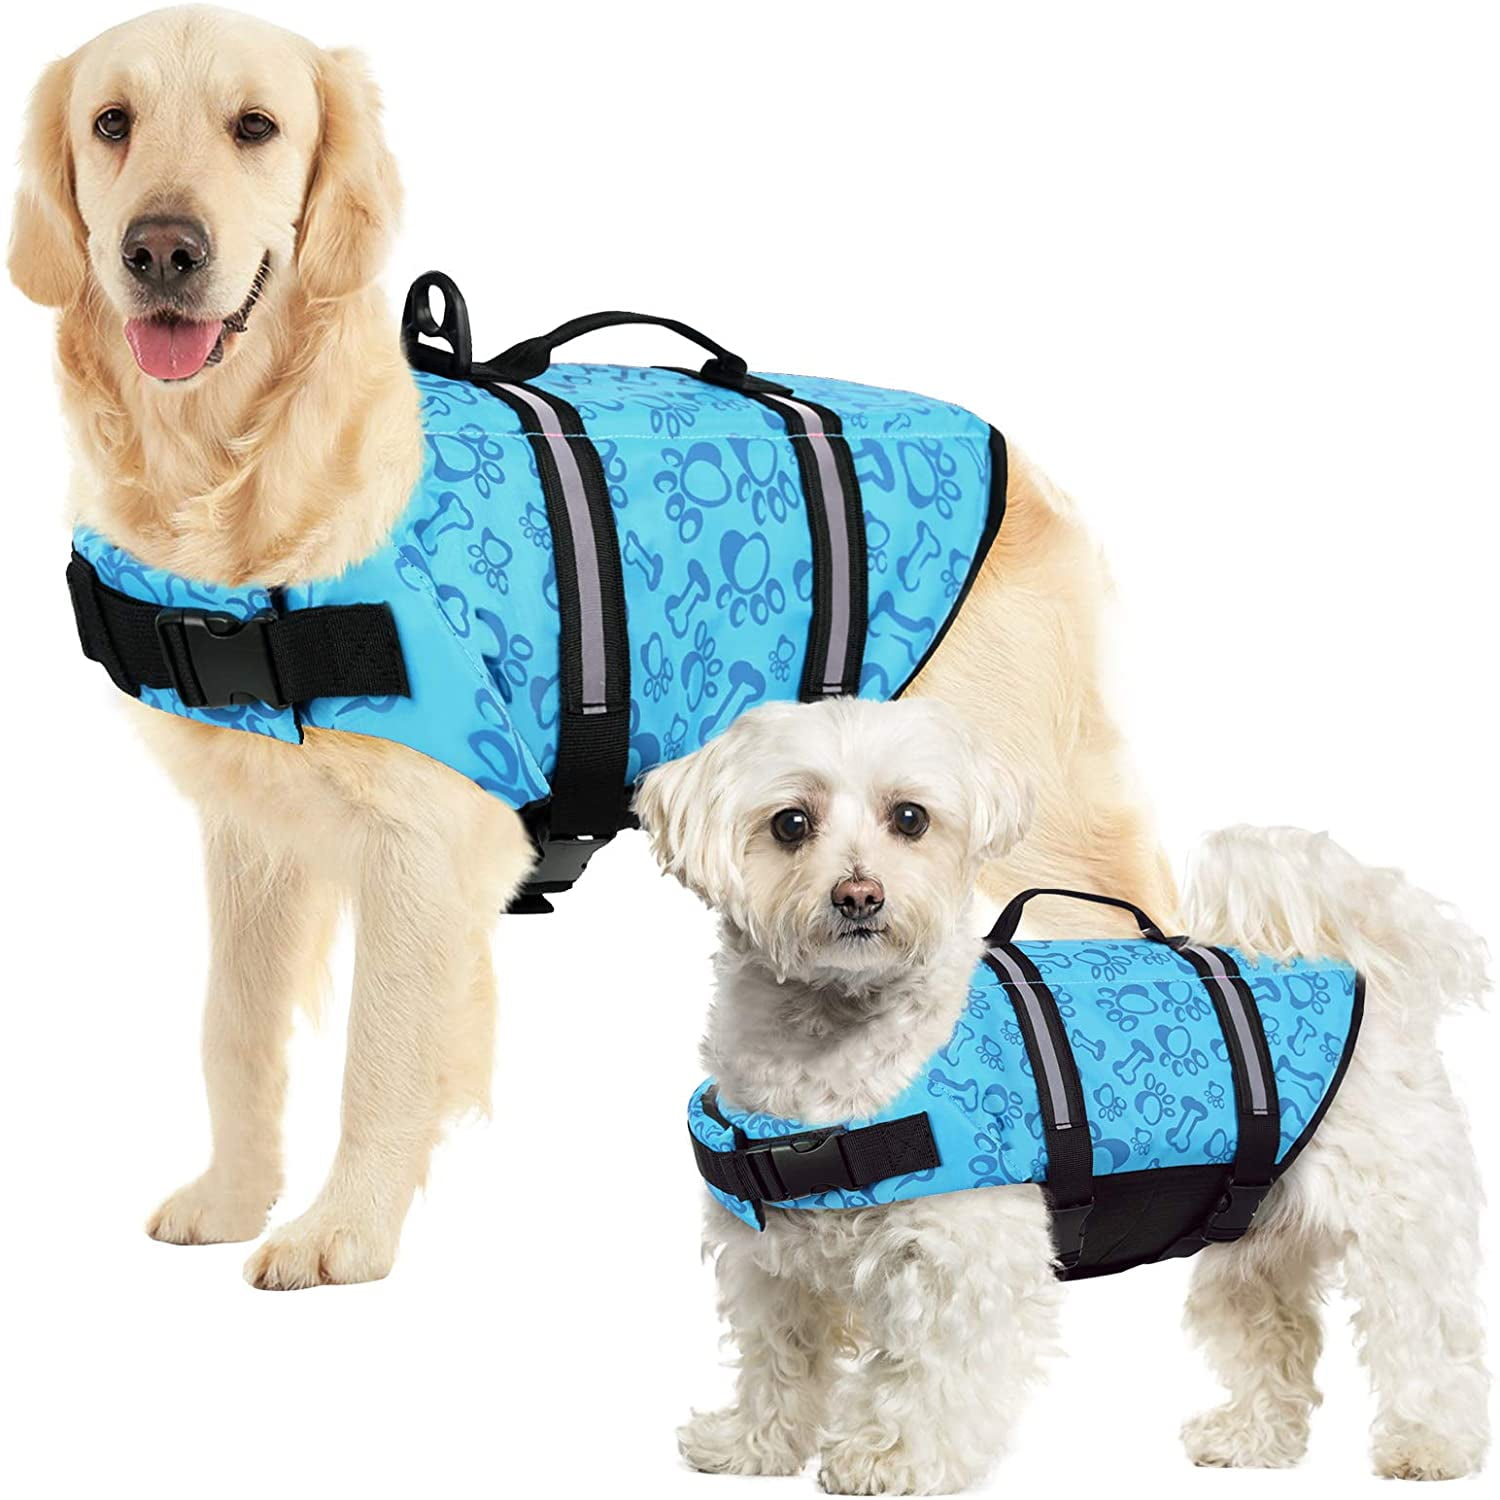 Adjustable Puppy Lifesaver Swimsuit Preserver for Small Medium Large Dogs Safety Pet Flotation Life Vest with Reflective Stripes and Rescue Handle SUNFURA Ripstop Dog Life Jacket Yellow, XL 